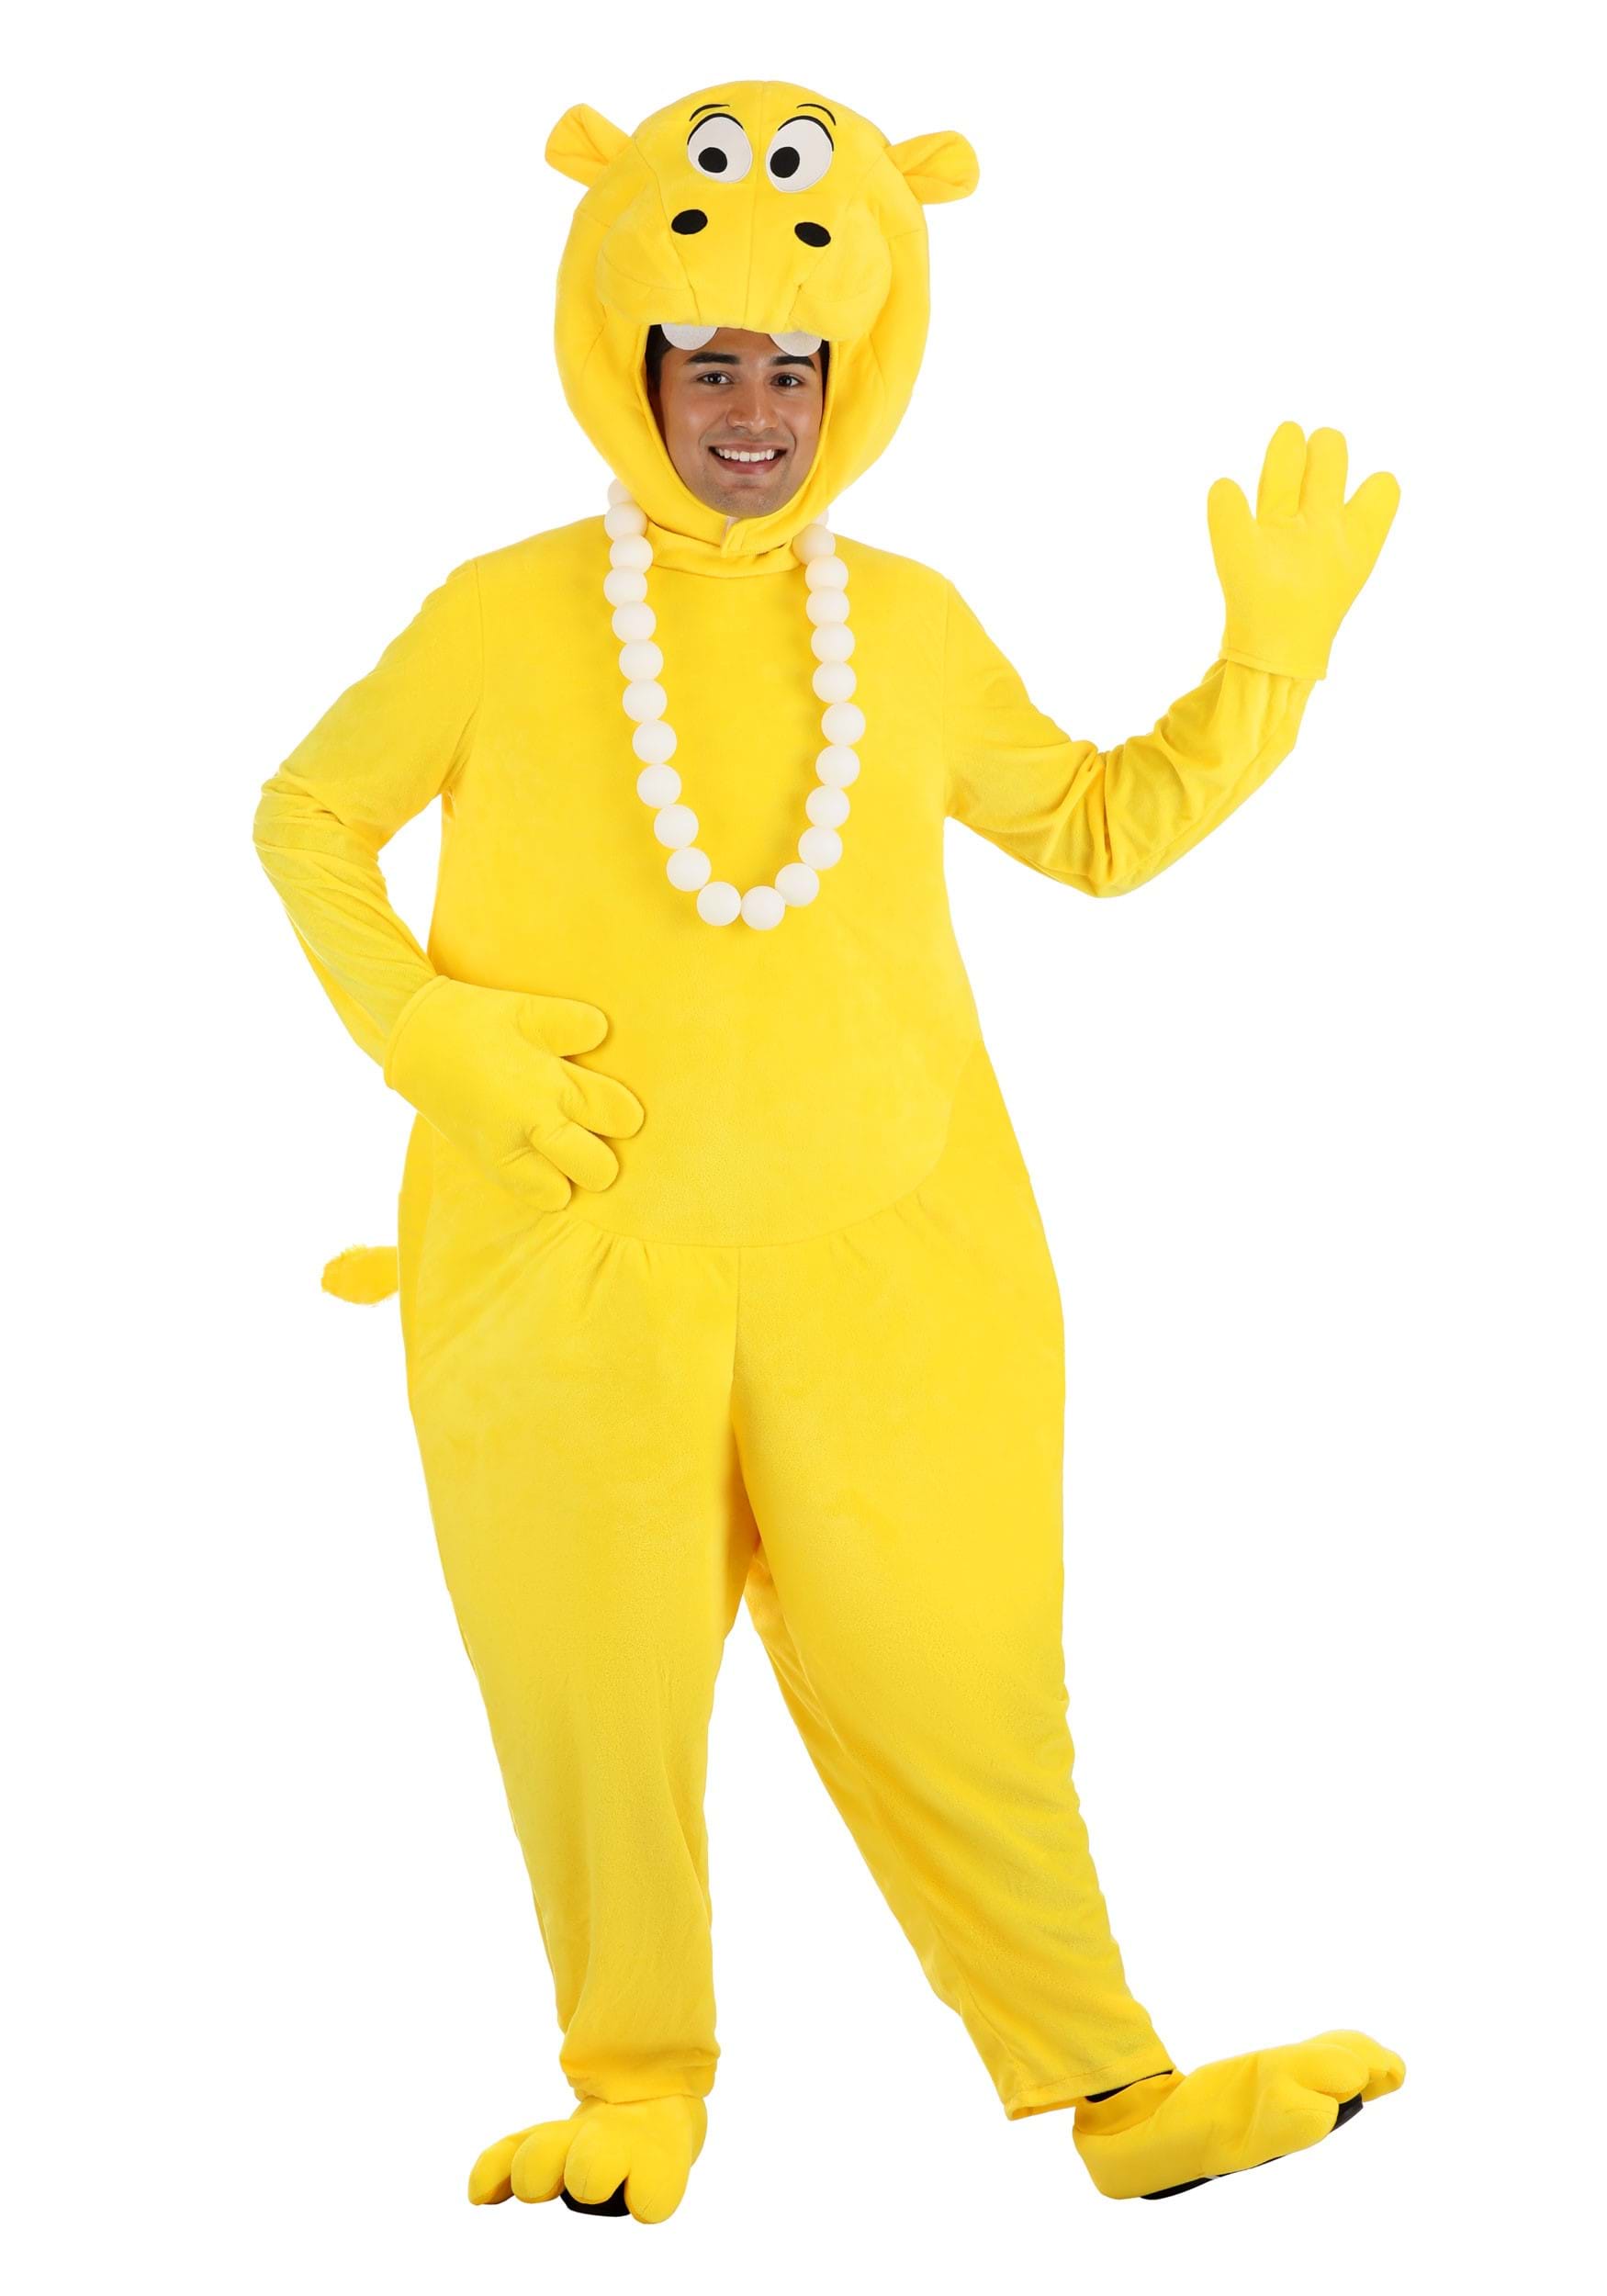 Photos - Fancy Dress Hasbro Yellow Hungry Hungry Hippos Adult Costume Yellow FUN1698AD 